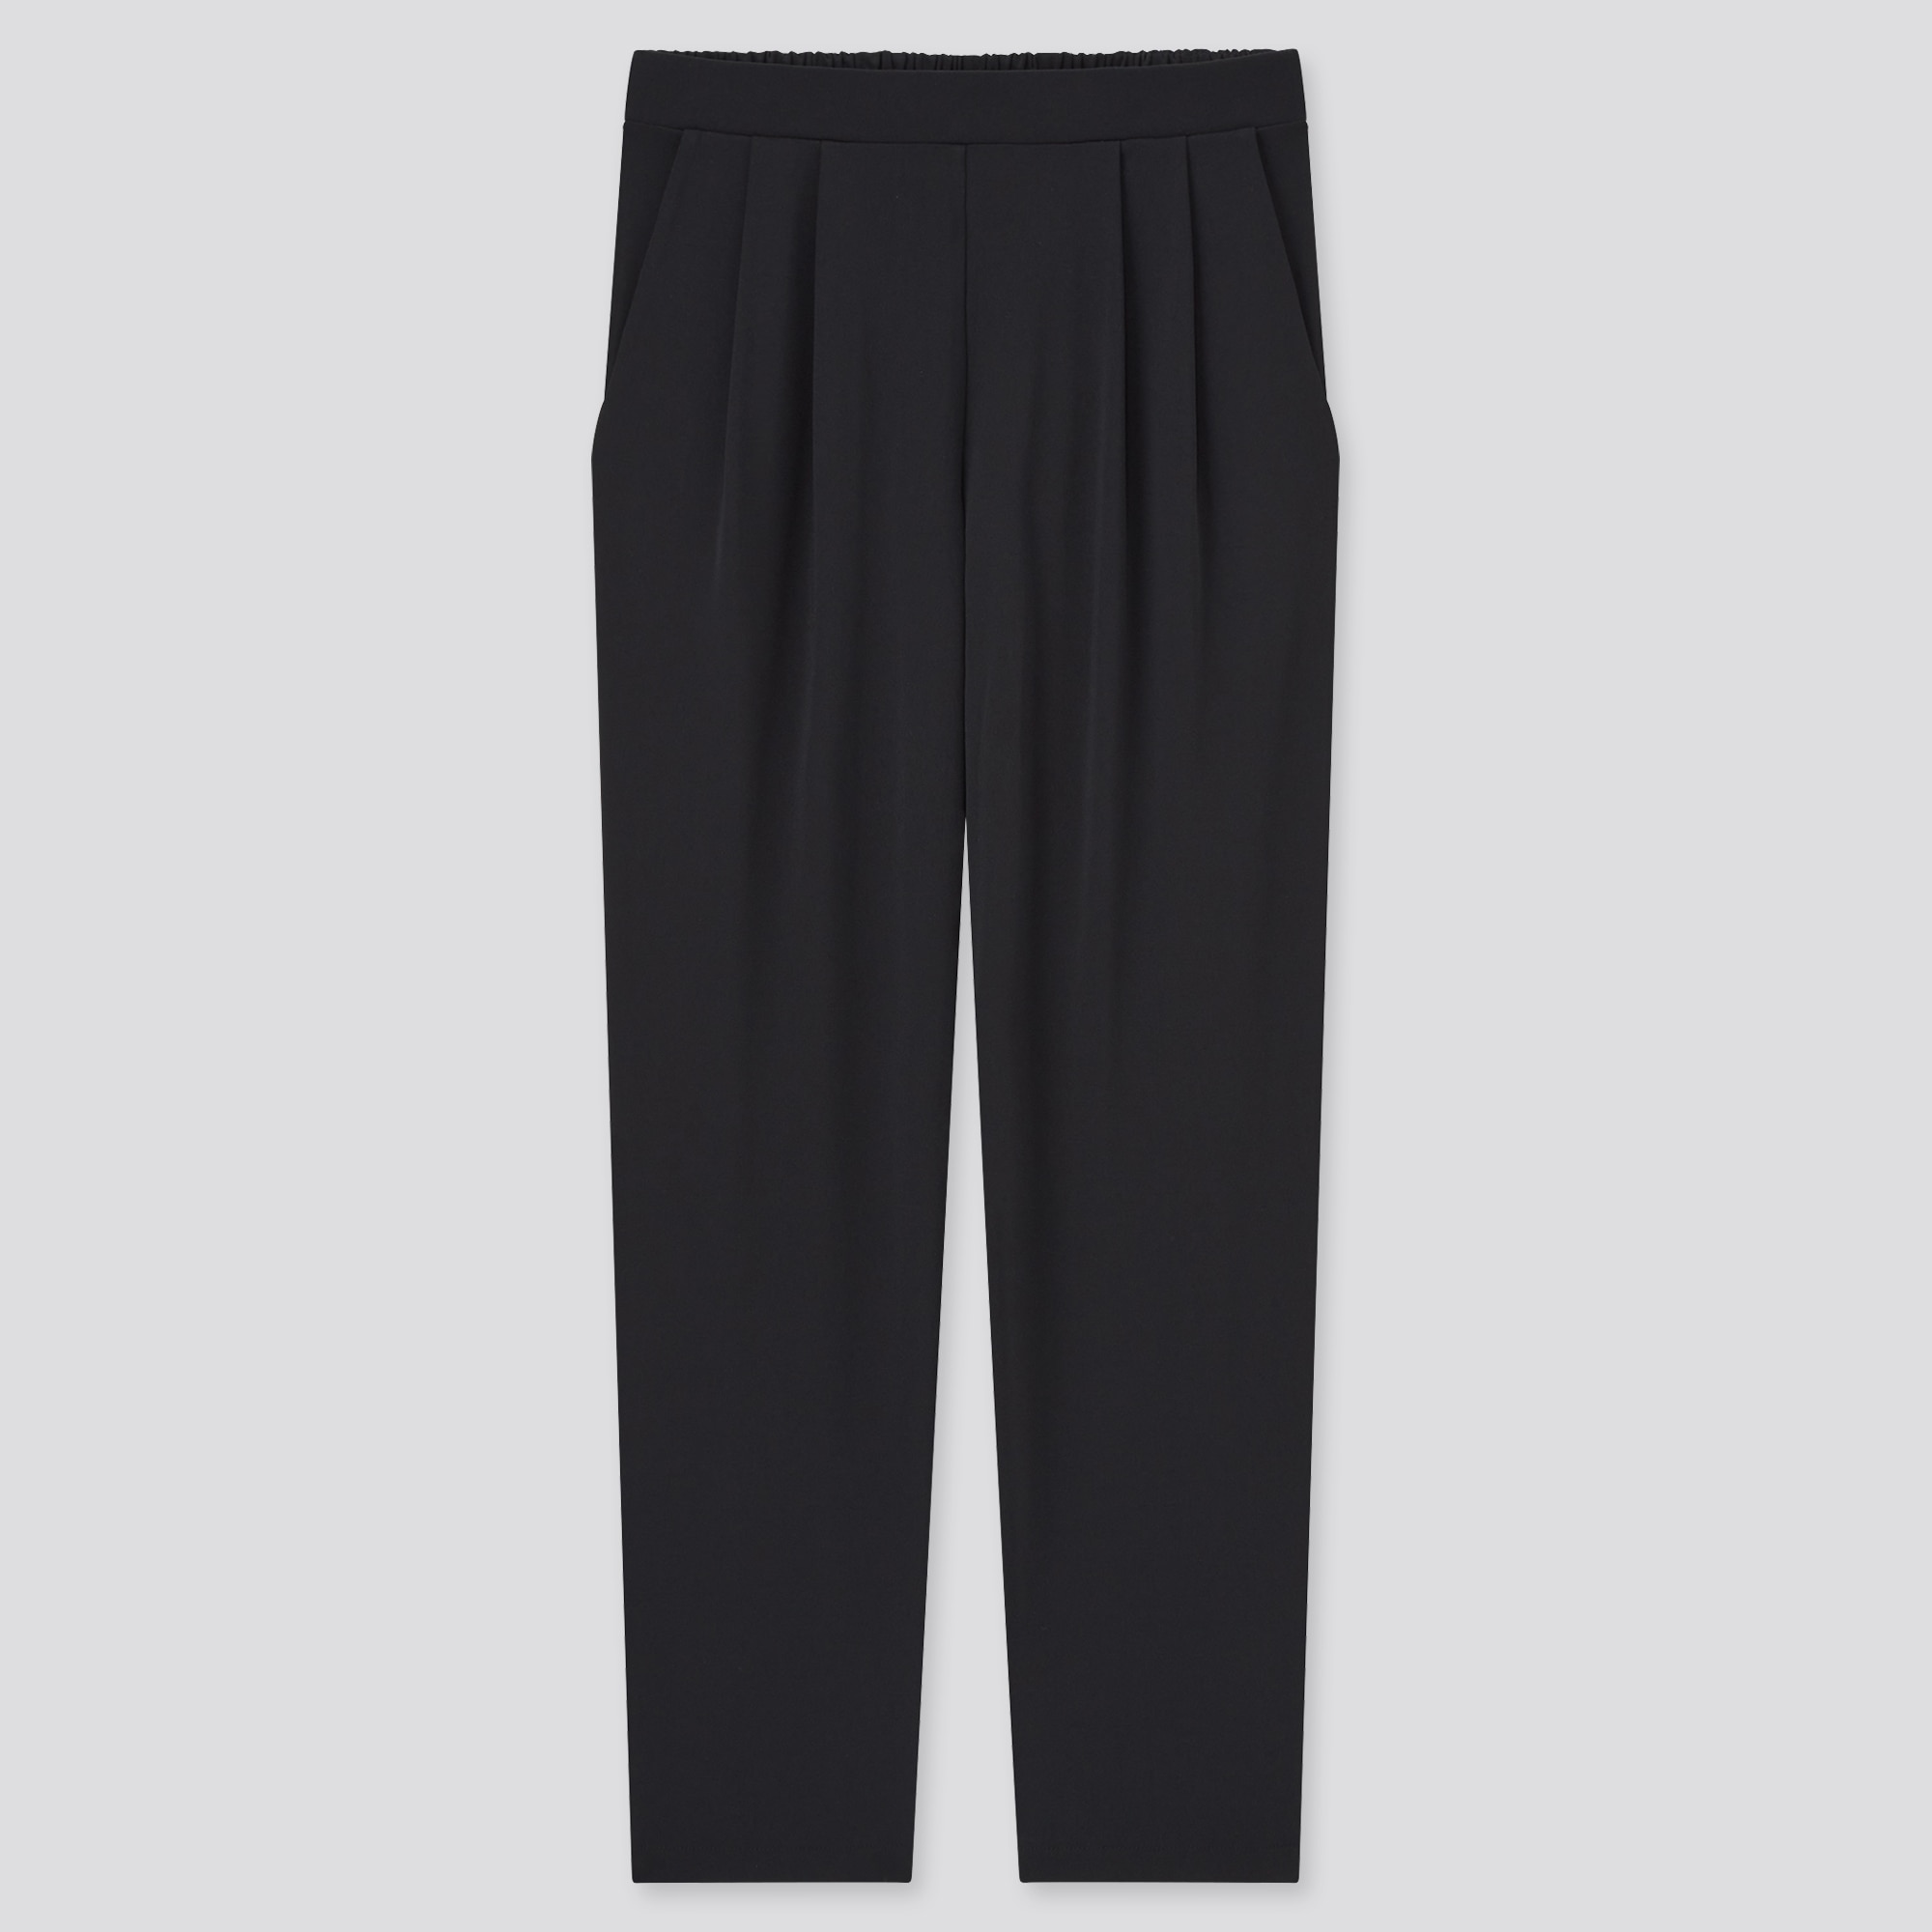 UNIQLO Ultra Stretch Active Jogger Pants | StyleHint